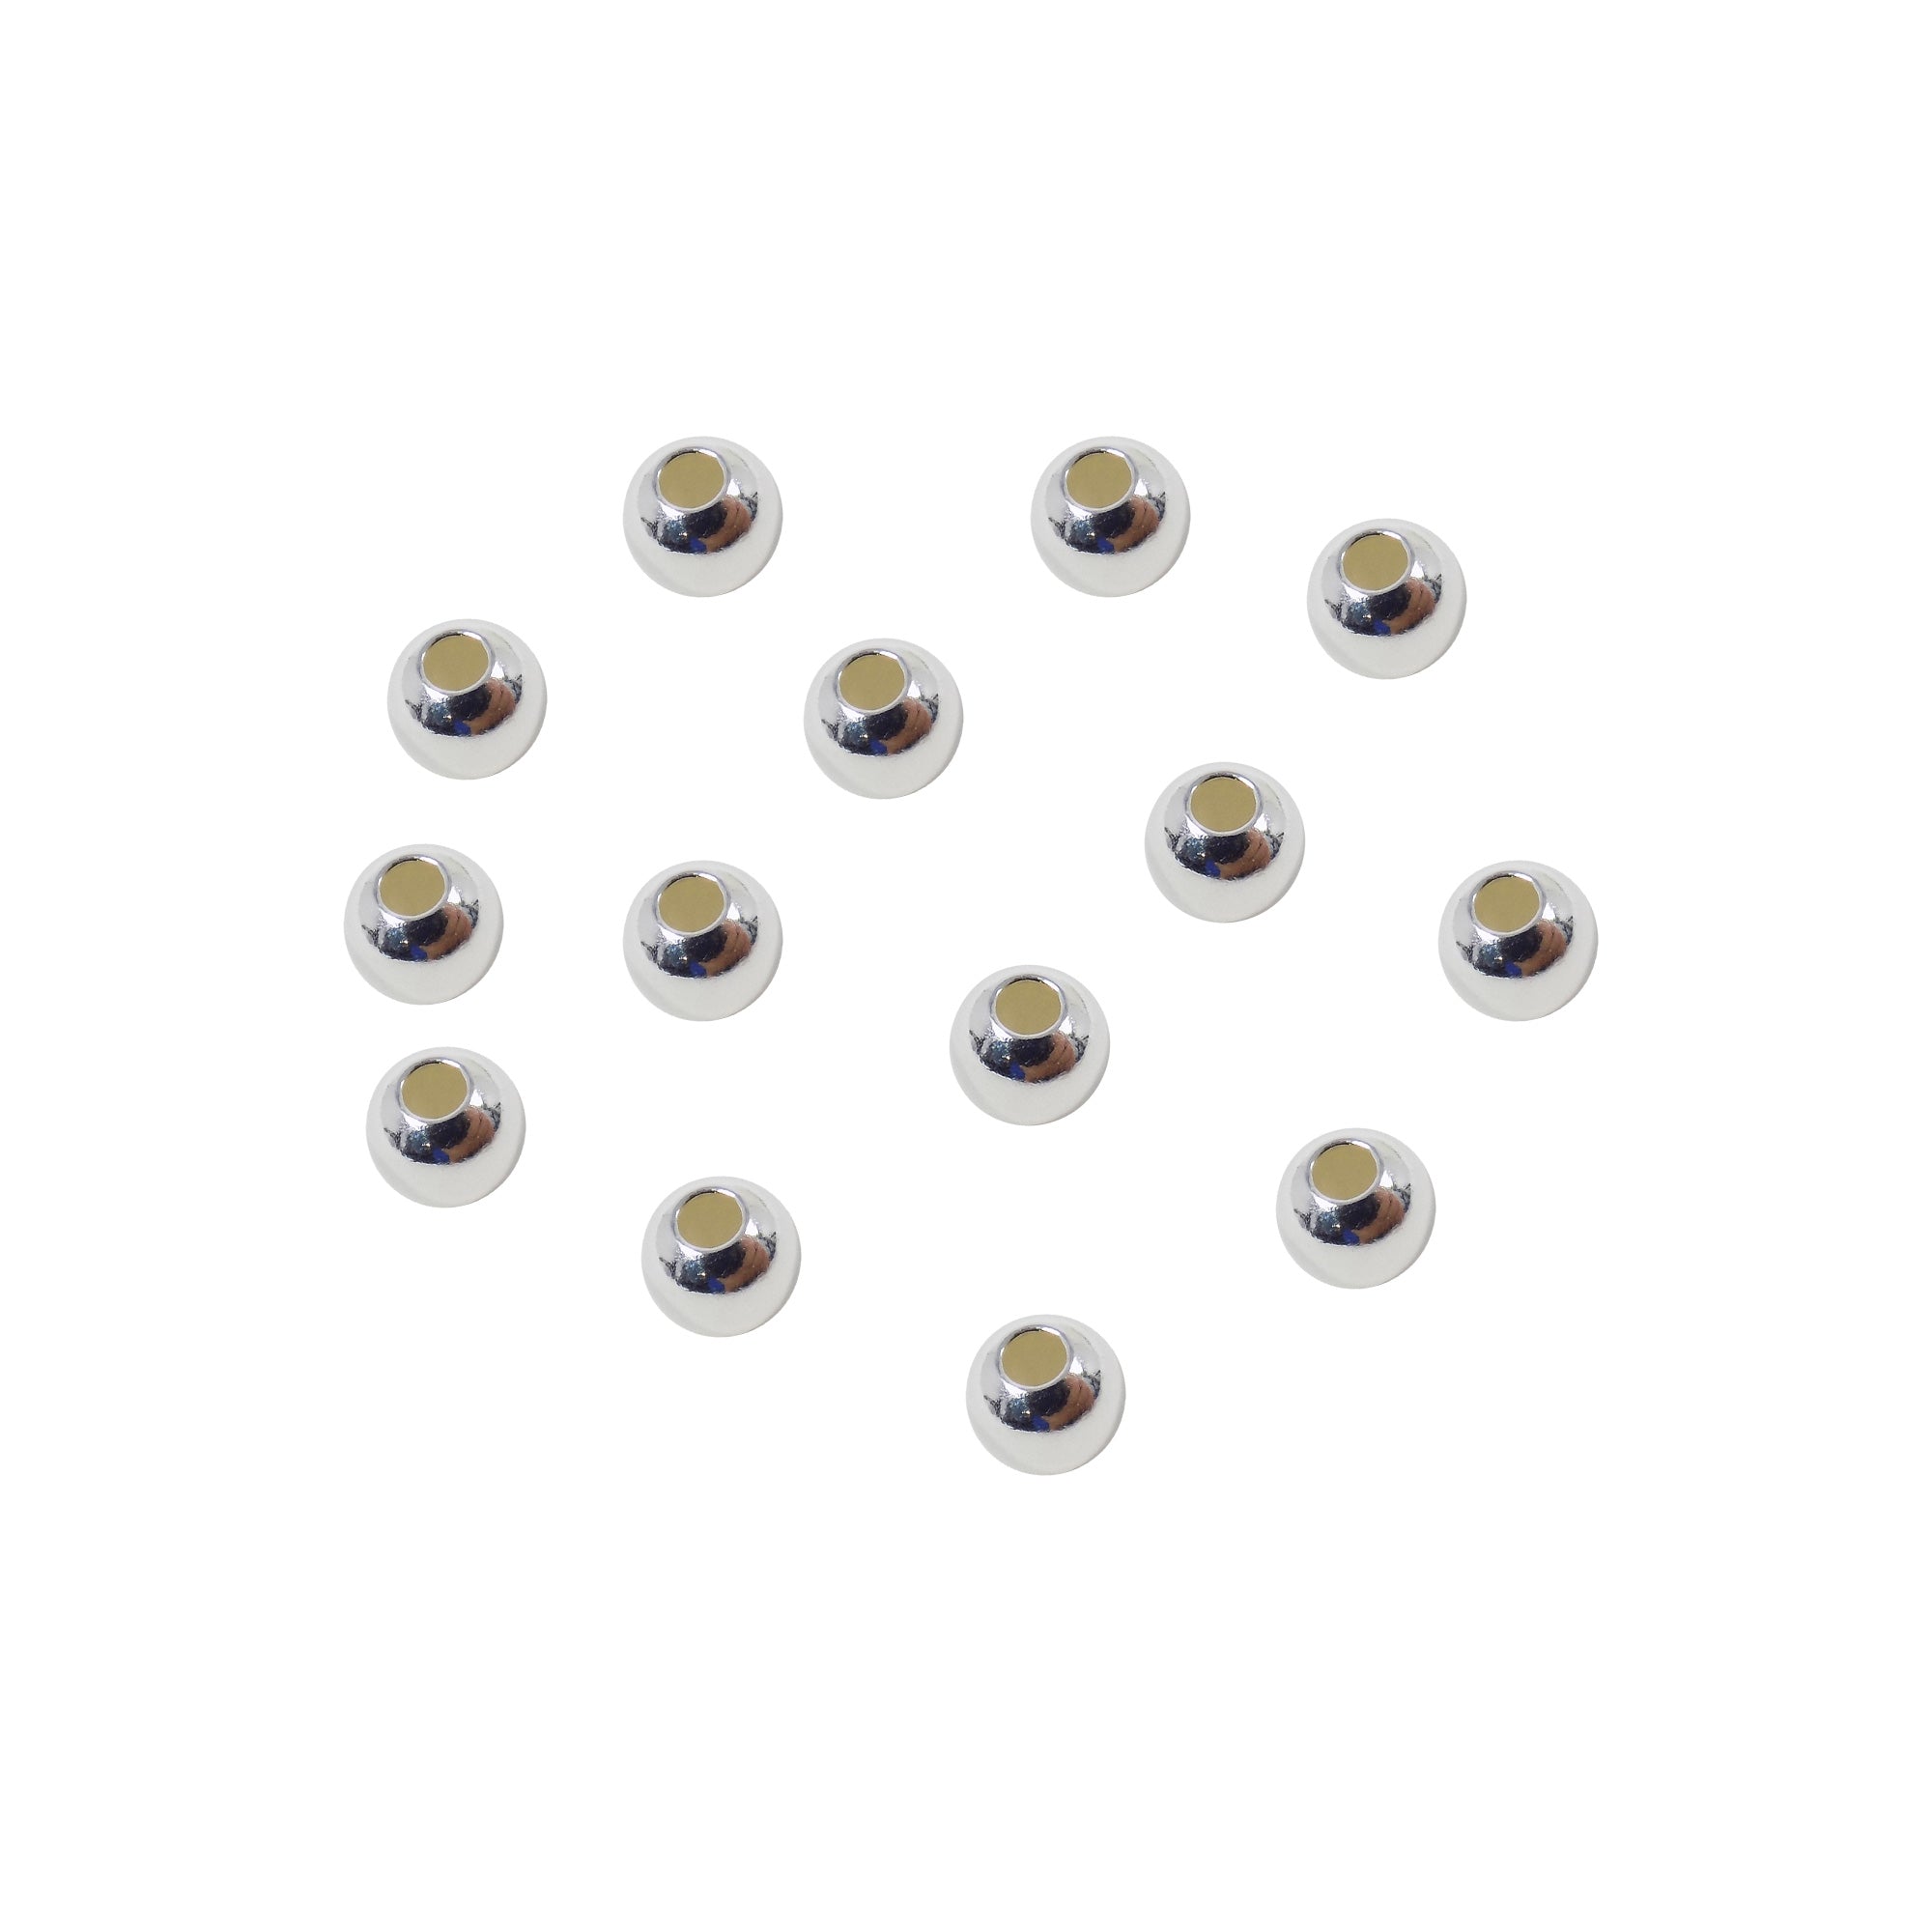 Sterling Silver Beads 3mm 25Pcs, Genuine Italian 925 Sterling Silver 3mm Hole 1.2mm, Round Balls High Polished Seamless USA Seller